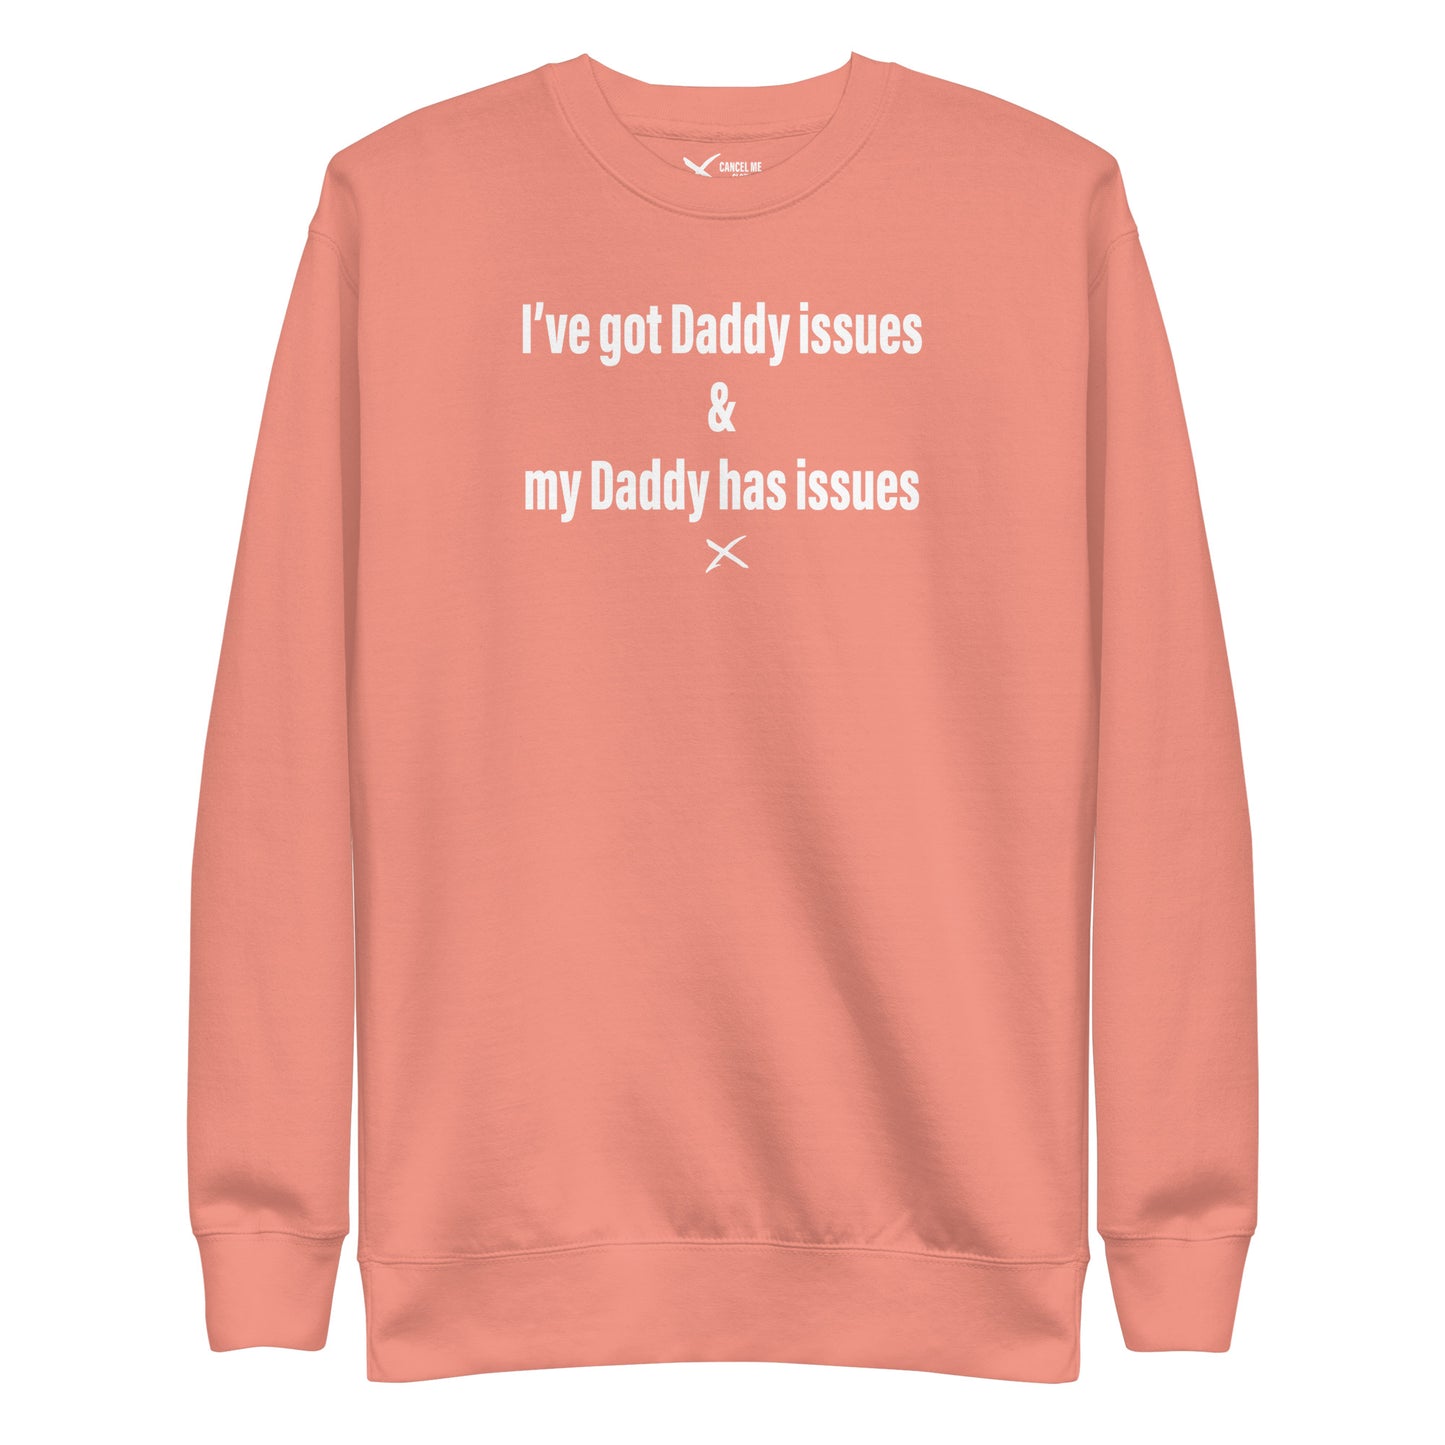 I've got Daddy issues & my Daddy has issues - Sweatshirt